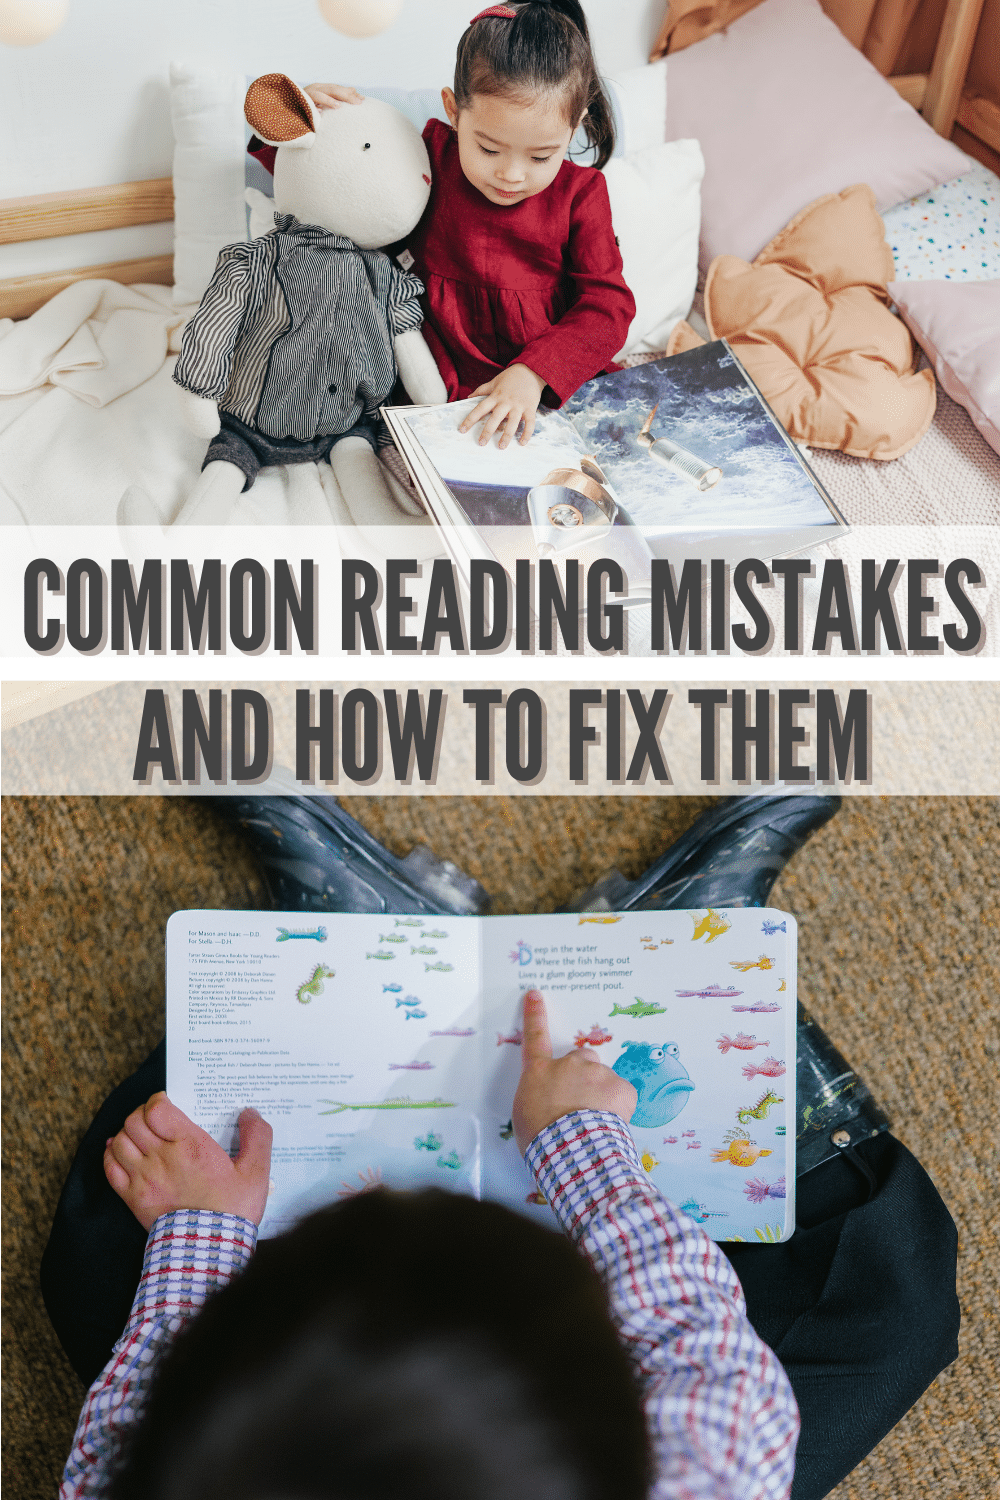 Reading is a challenge for a lot of young children. Here are some of the more common reading mistakes, and how to fix them. #parentingtips #reading #LearningToRead #teachingkids via @wondermomwannab